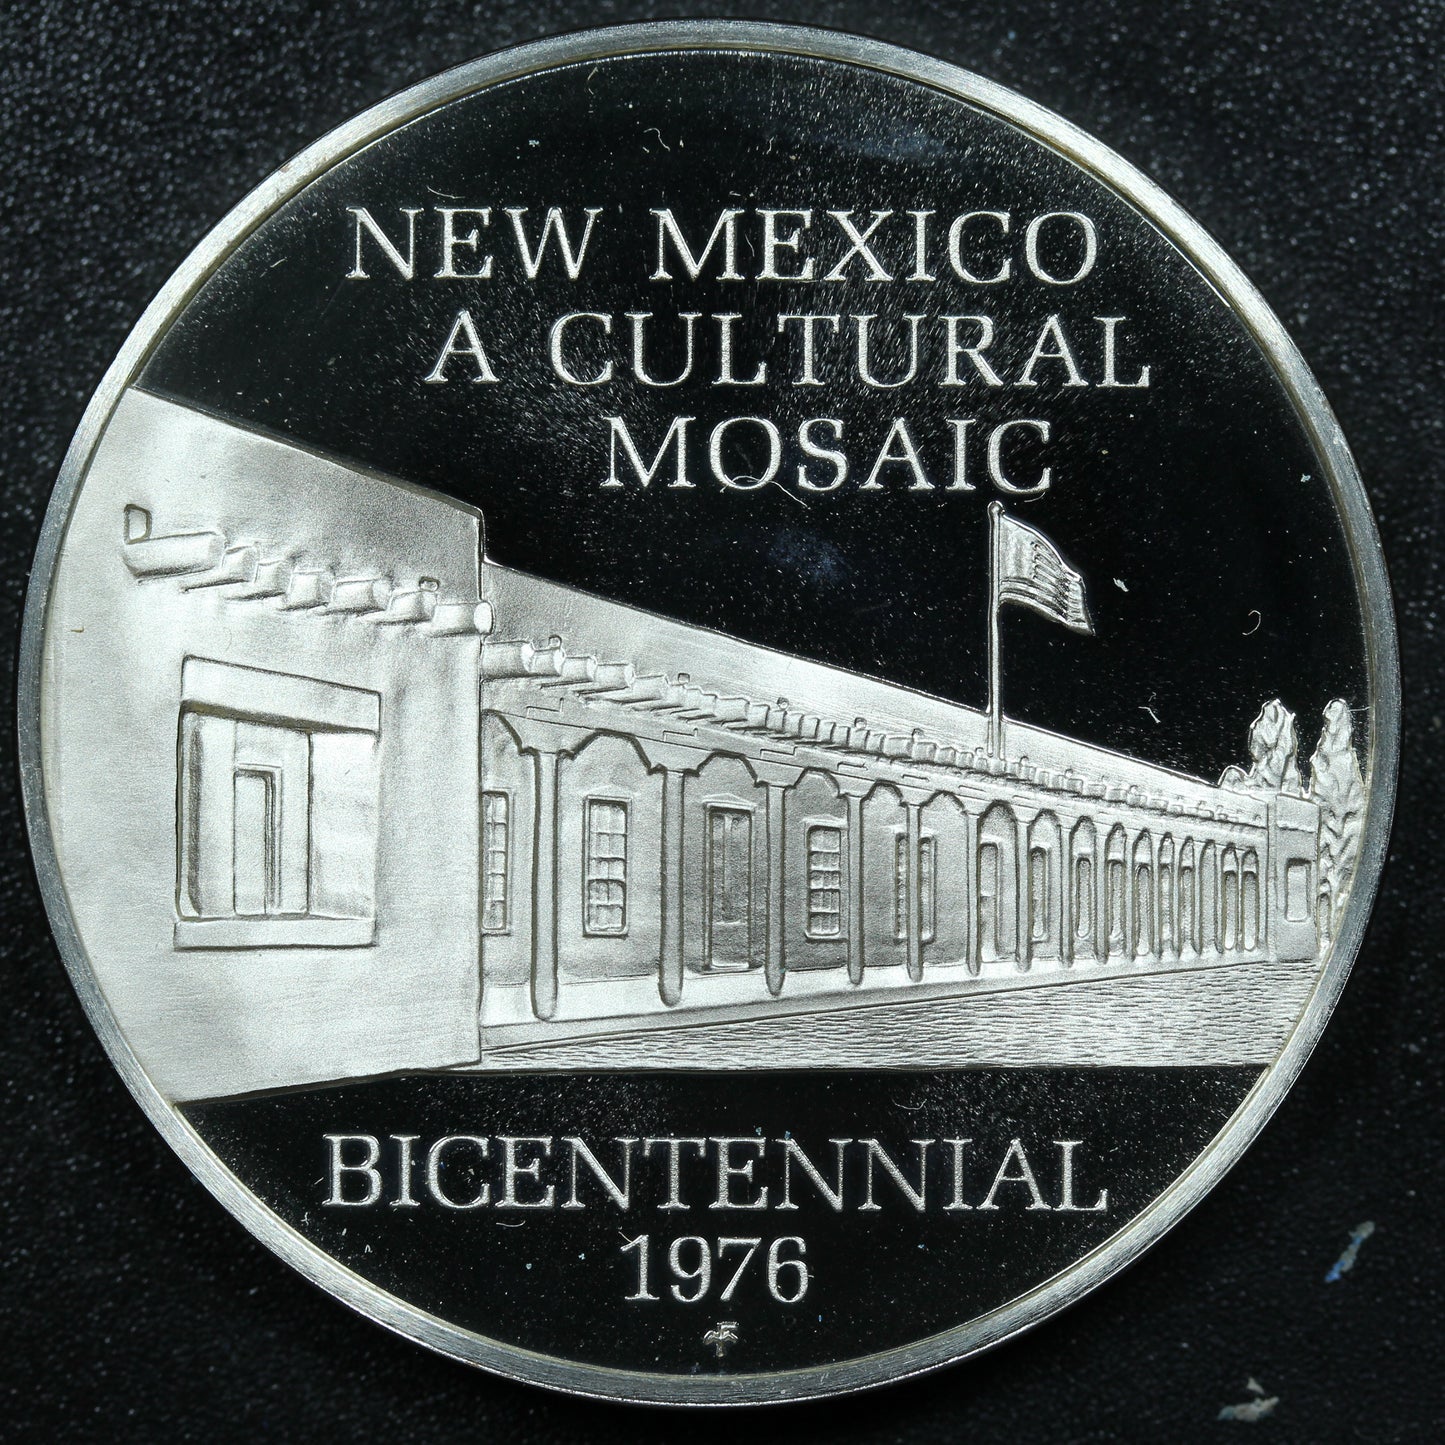 Franklin Mint 50 State Bicentennial Medal - NEW MEXICO Sterling Silver Proof w/ Capsule